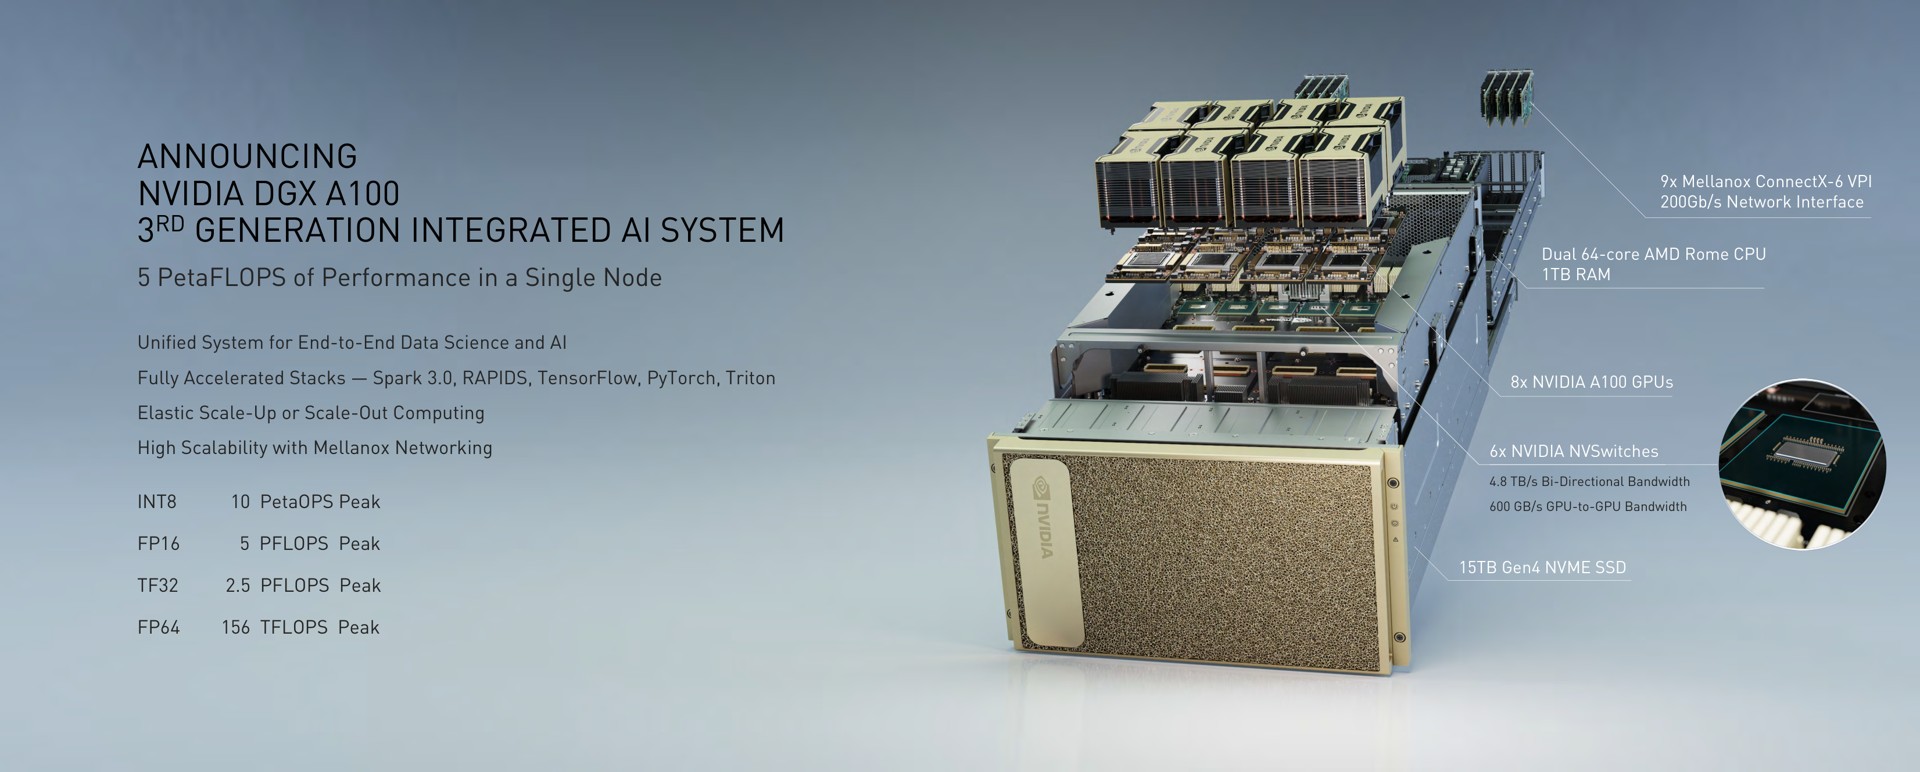 announcing a generation integrated system | NVIDIA